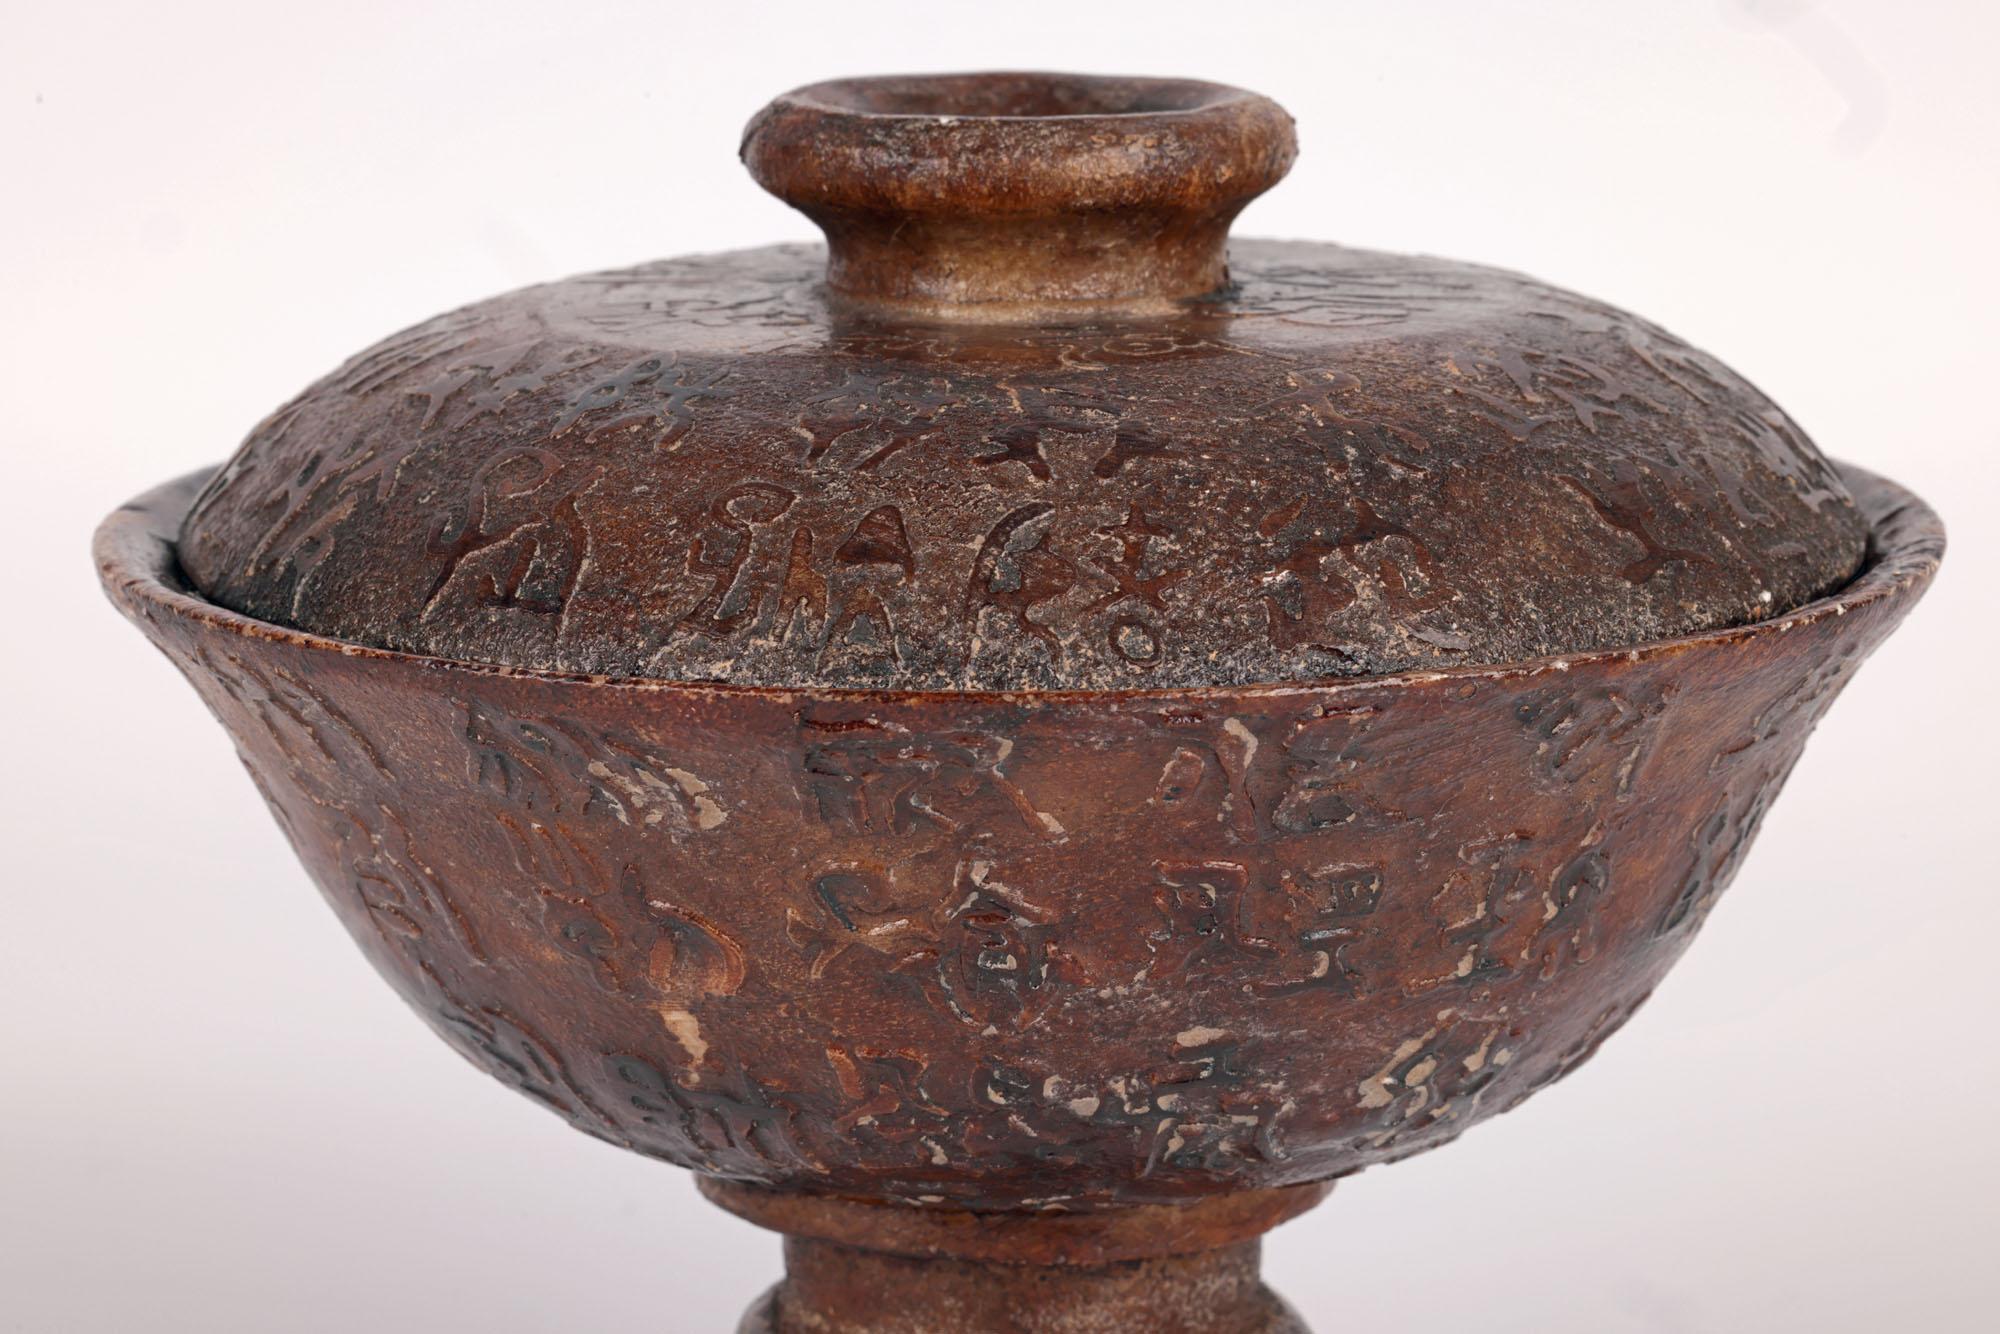 An unusual Chinese archaic style script carved lidded stone vessel probably dating from the Qing dynasty or later. The heavily made vessel is made, we believe, from soapstone and comprises of a round bowl shaped pedestal base raised on a narrow